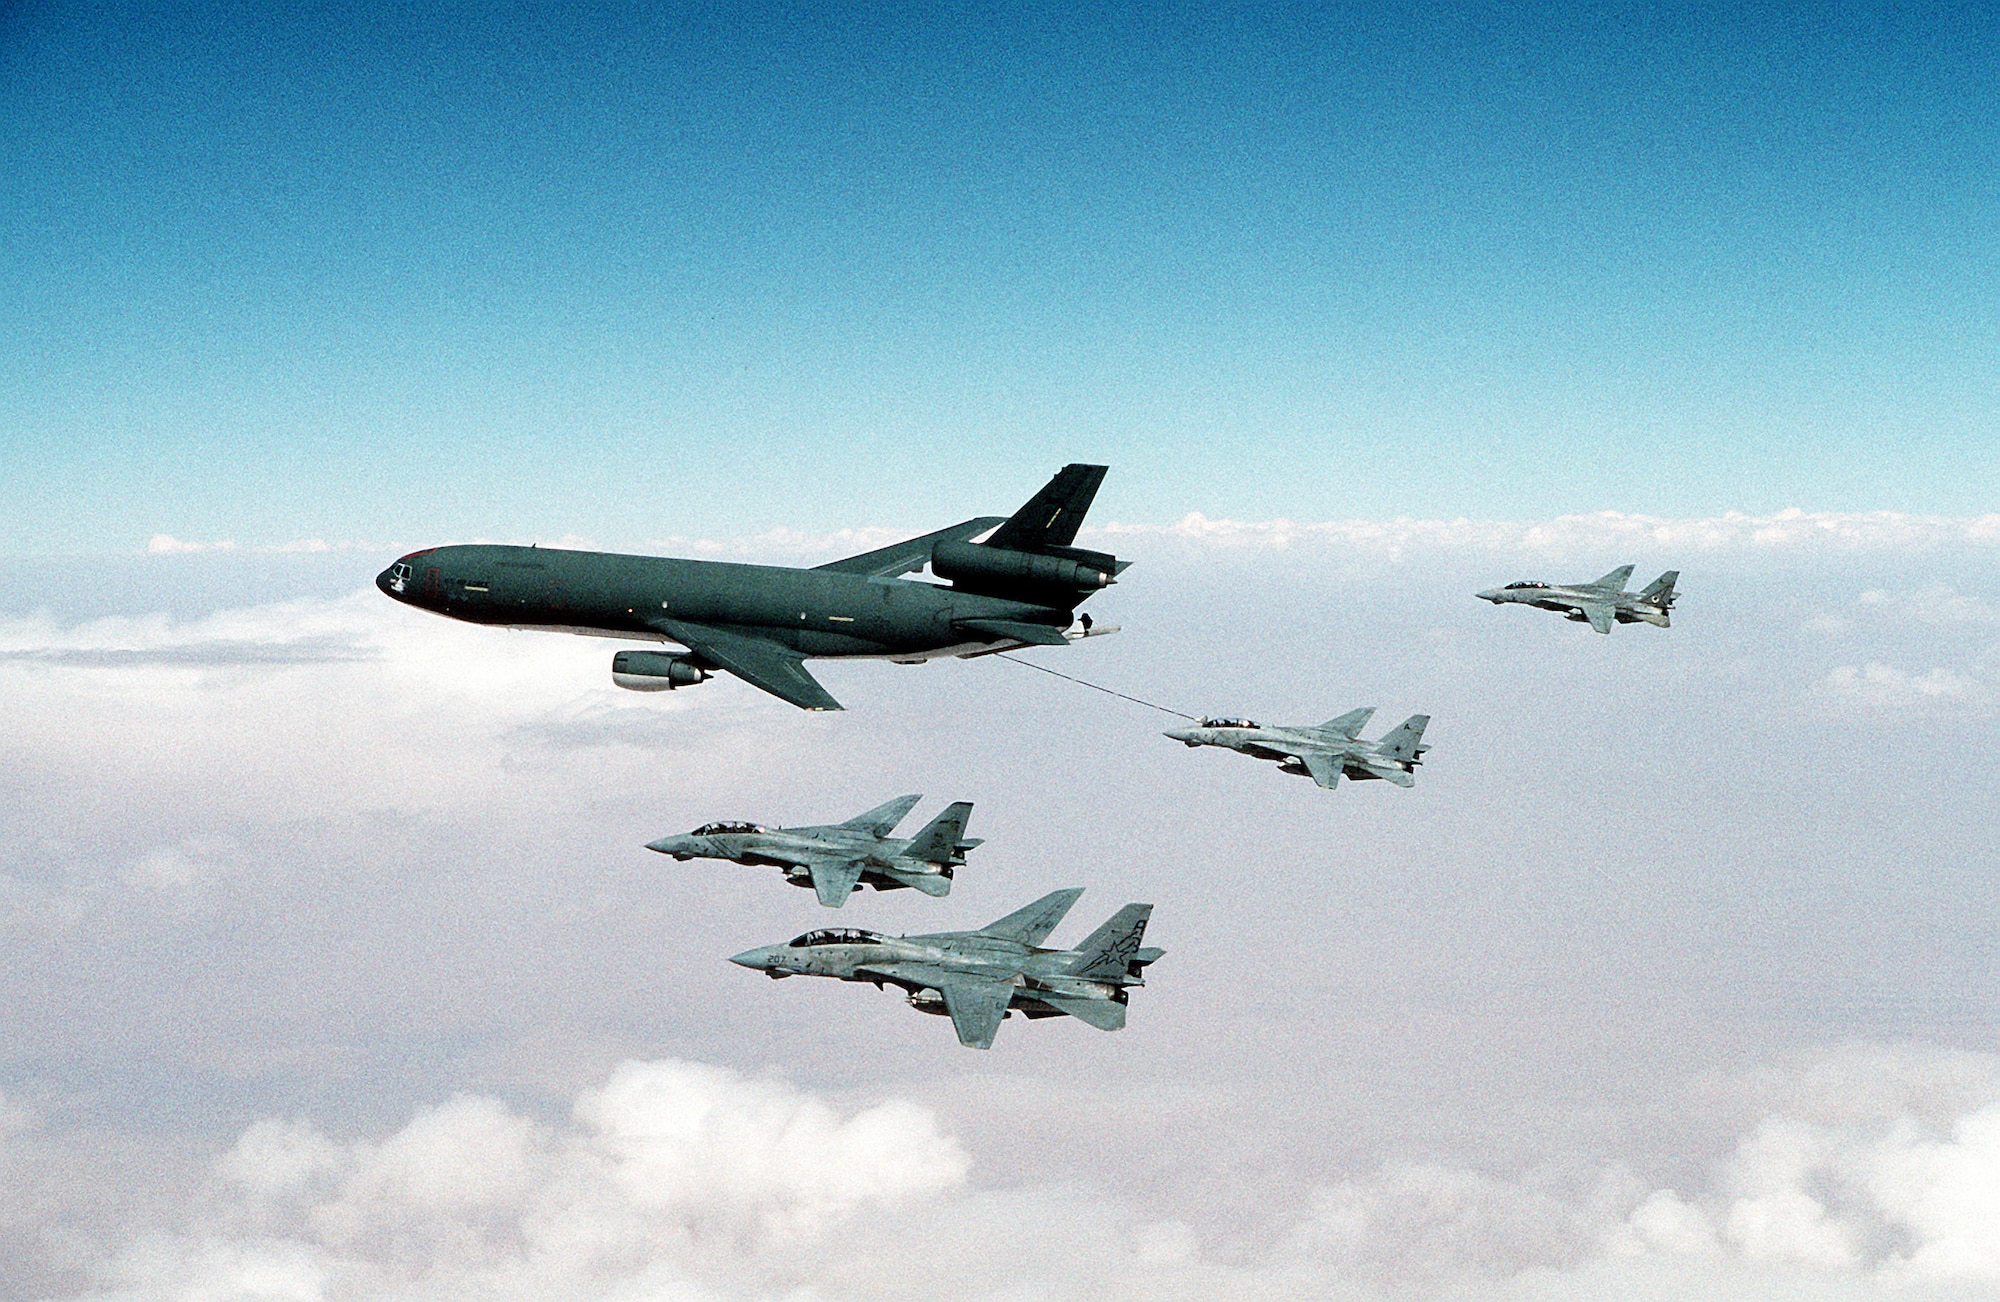 An F-14A Tomcat refuels from a U.S. Air Force KC-10A Extender as other Tomcats fly in formation, during Operation Desert Storm. Squadrons represented by the aircraft are (from foreground) Fighter Squadron 33 (VF-33), Fighter Squadron 84 (VF-84) and Fighter Squadron 14 (VF-14). (Courtesy photo)